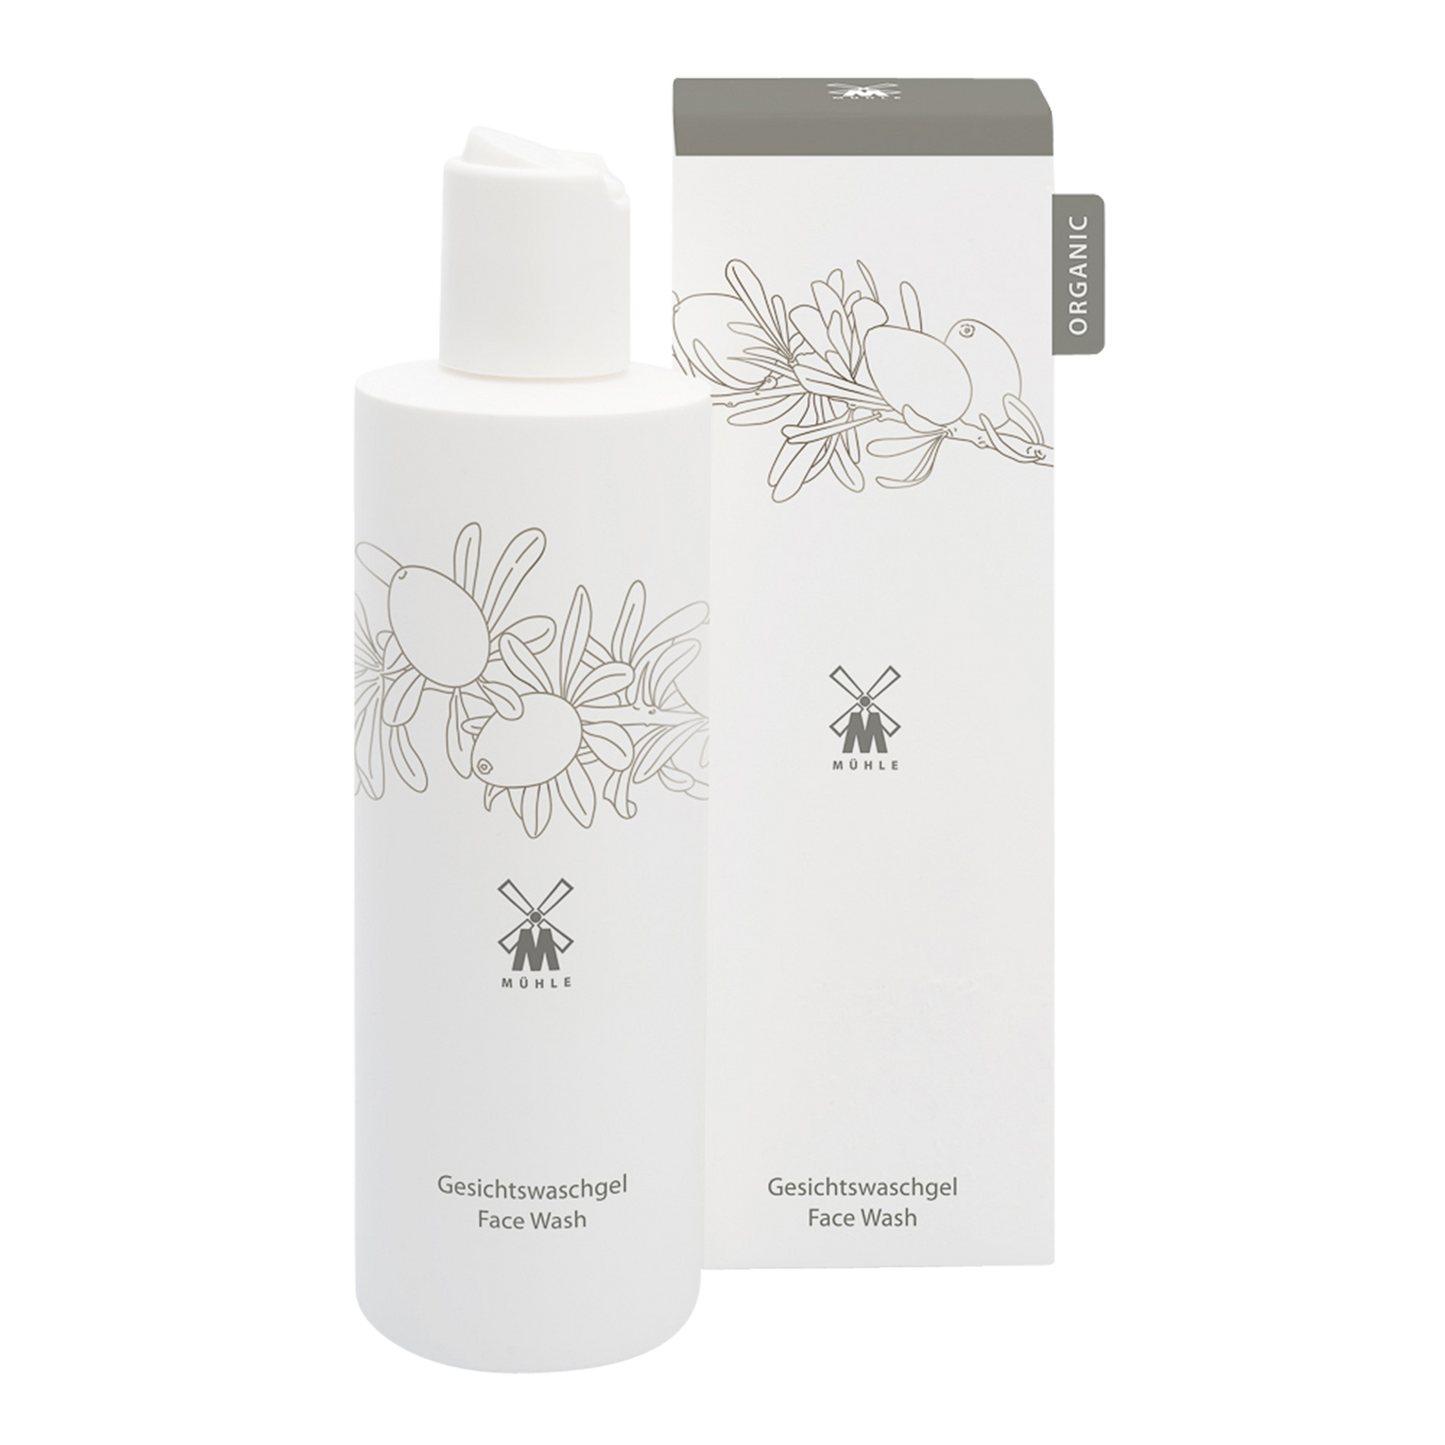 MUHLE Organic Face Wash: Suitable for all skin types.  Designed to nourish and moisturize, this mild face wash from MUHLE contains only the best for your skin.